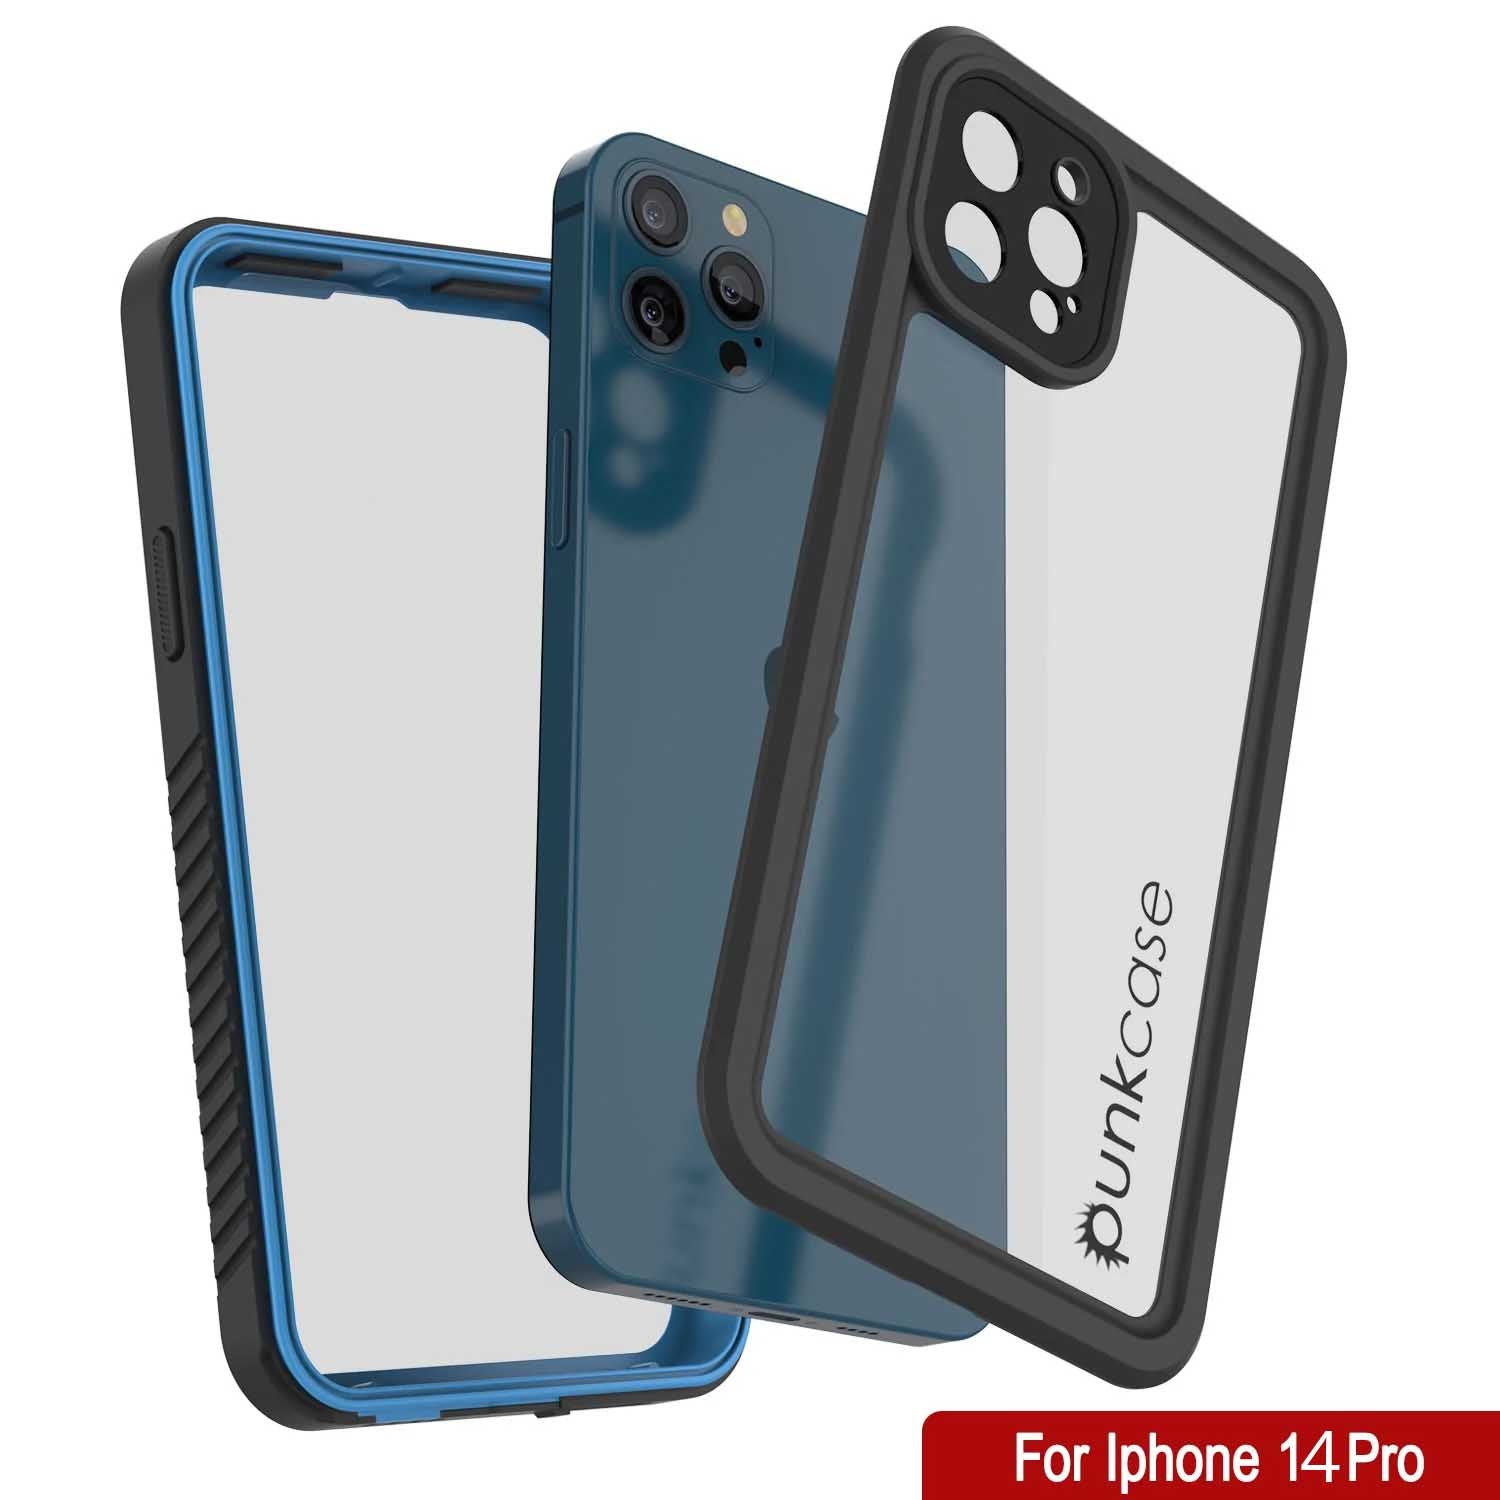 iPhone 14 Pro Waterproof Case, Punkcase [Extreme Series] Armor Cover W/ Built In Screen Protector [Light Blue]